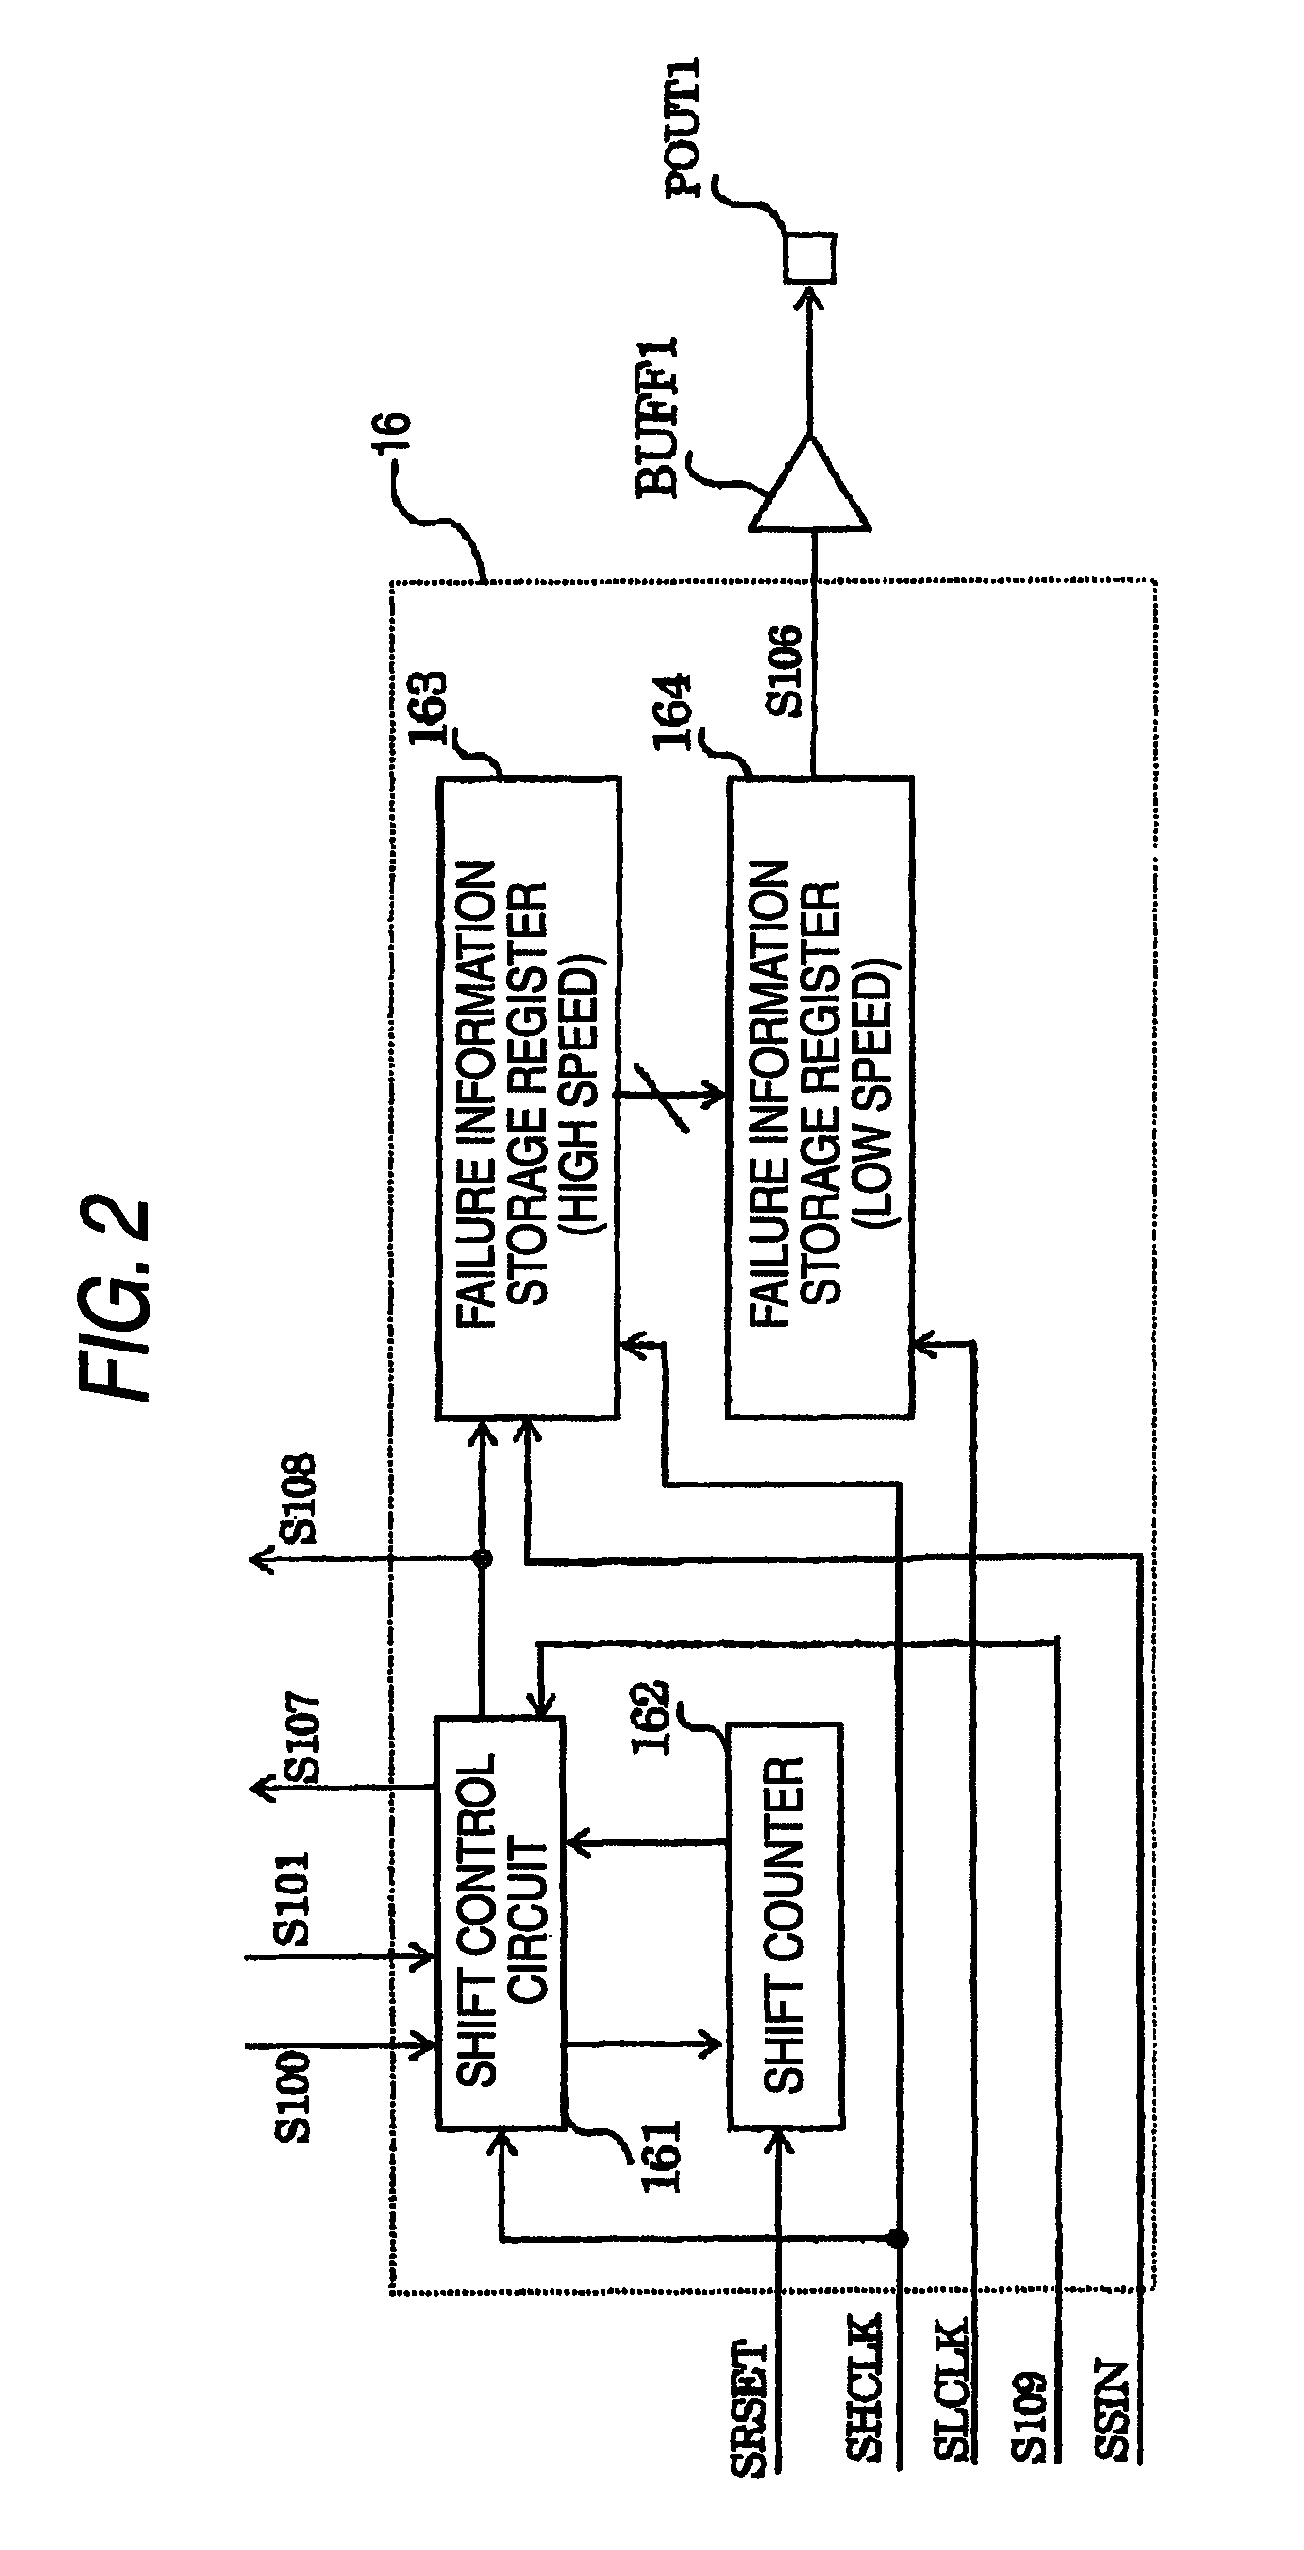 Built-in self testing circuit with fault diagnostic capability